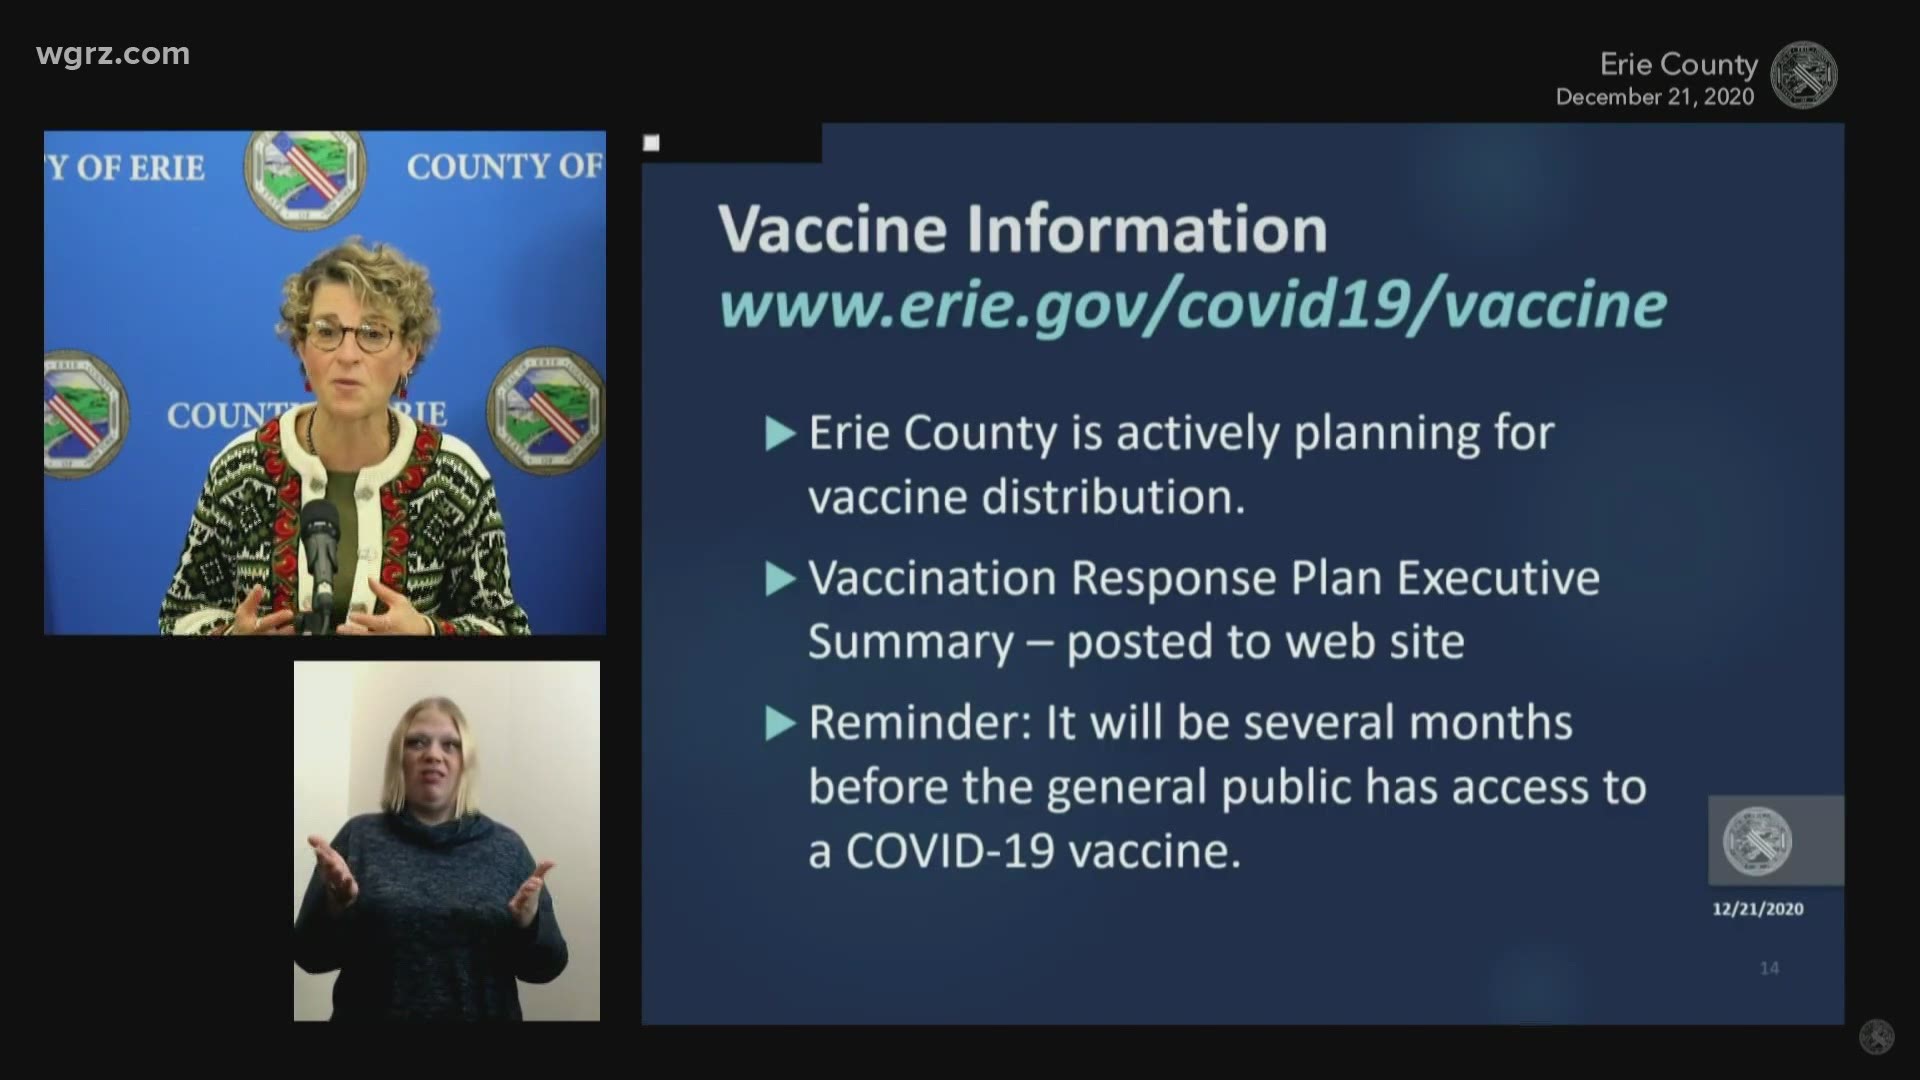 Vaccines will be extremely limited & prioritized